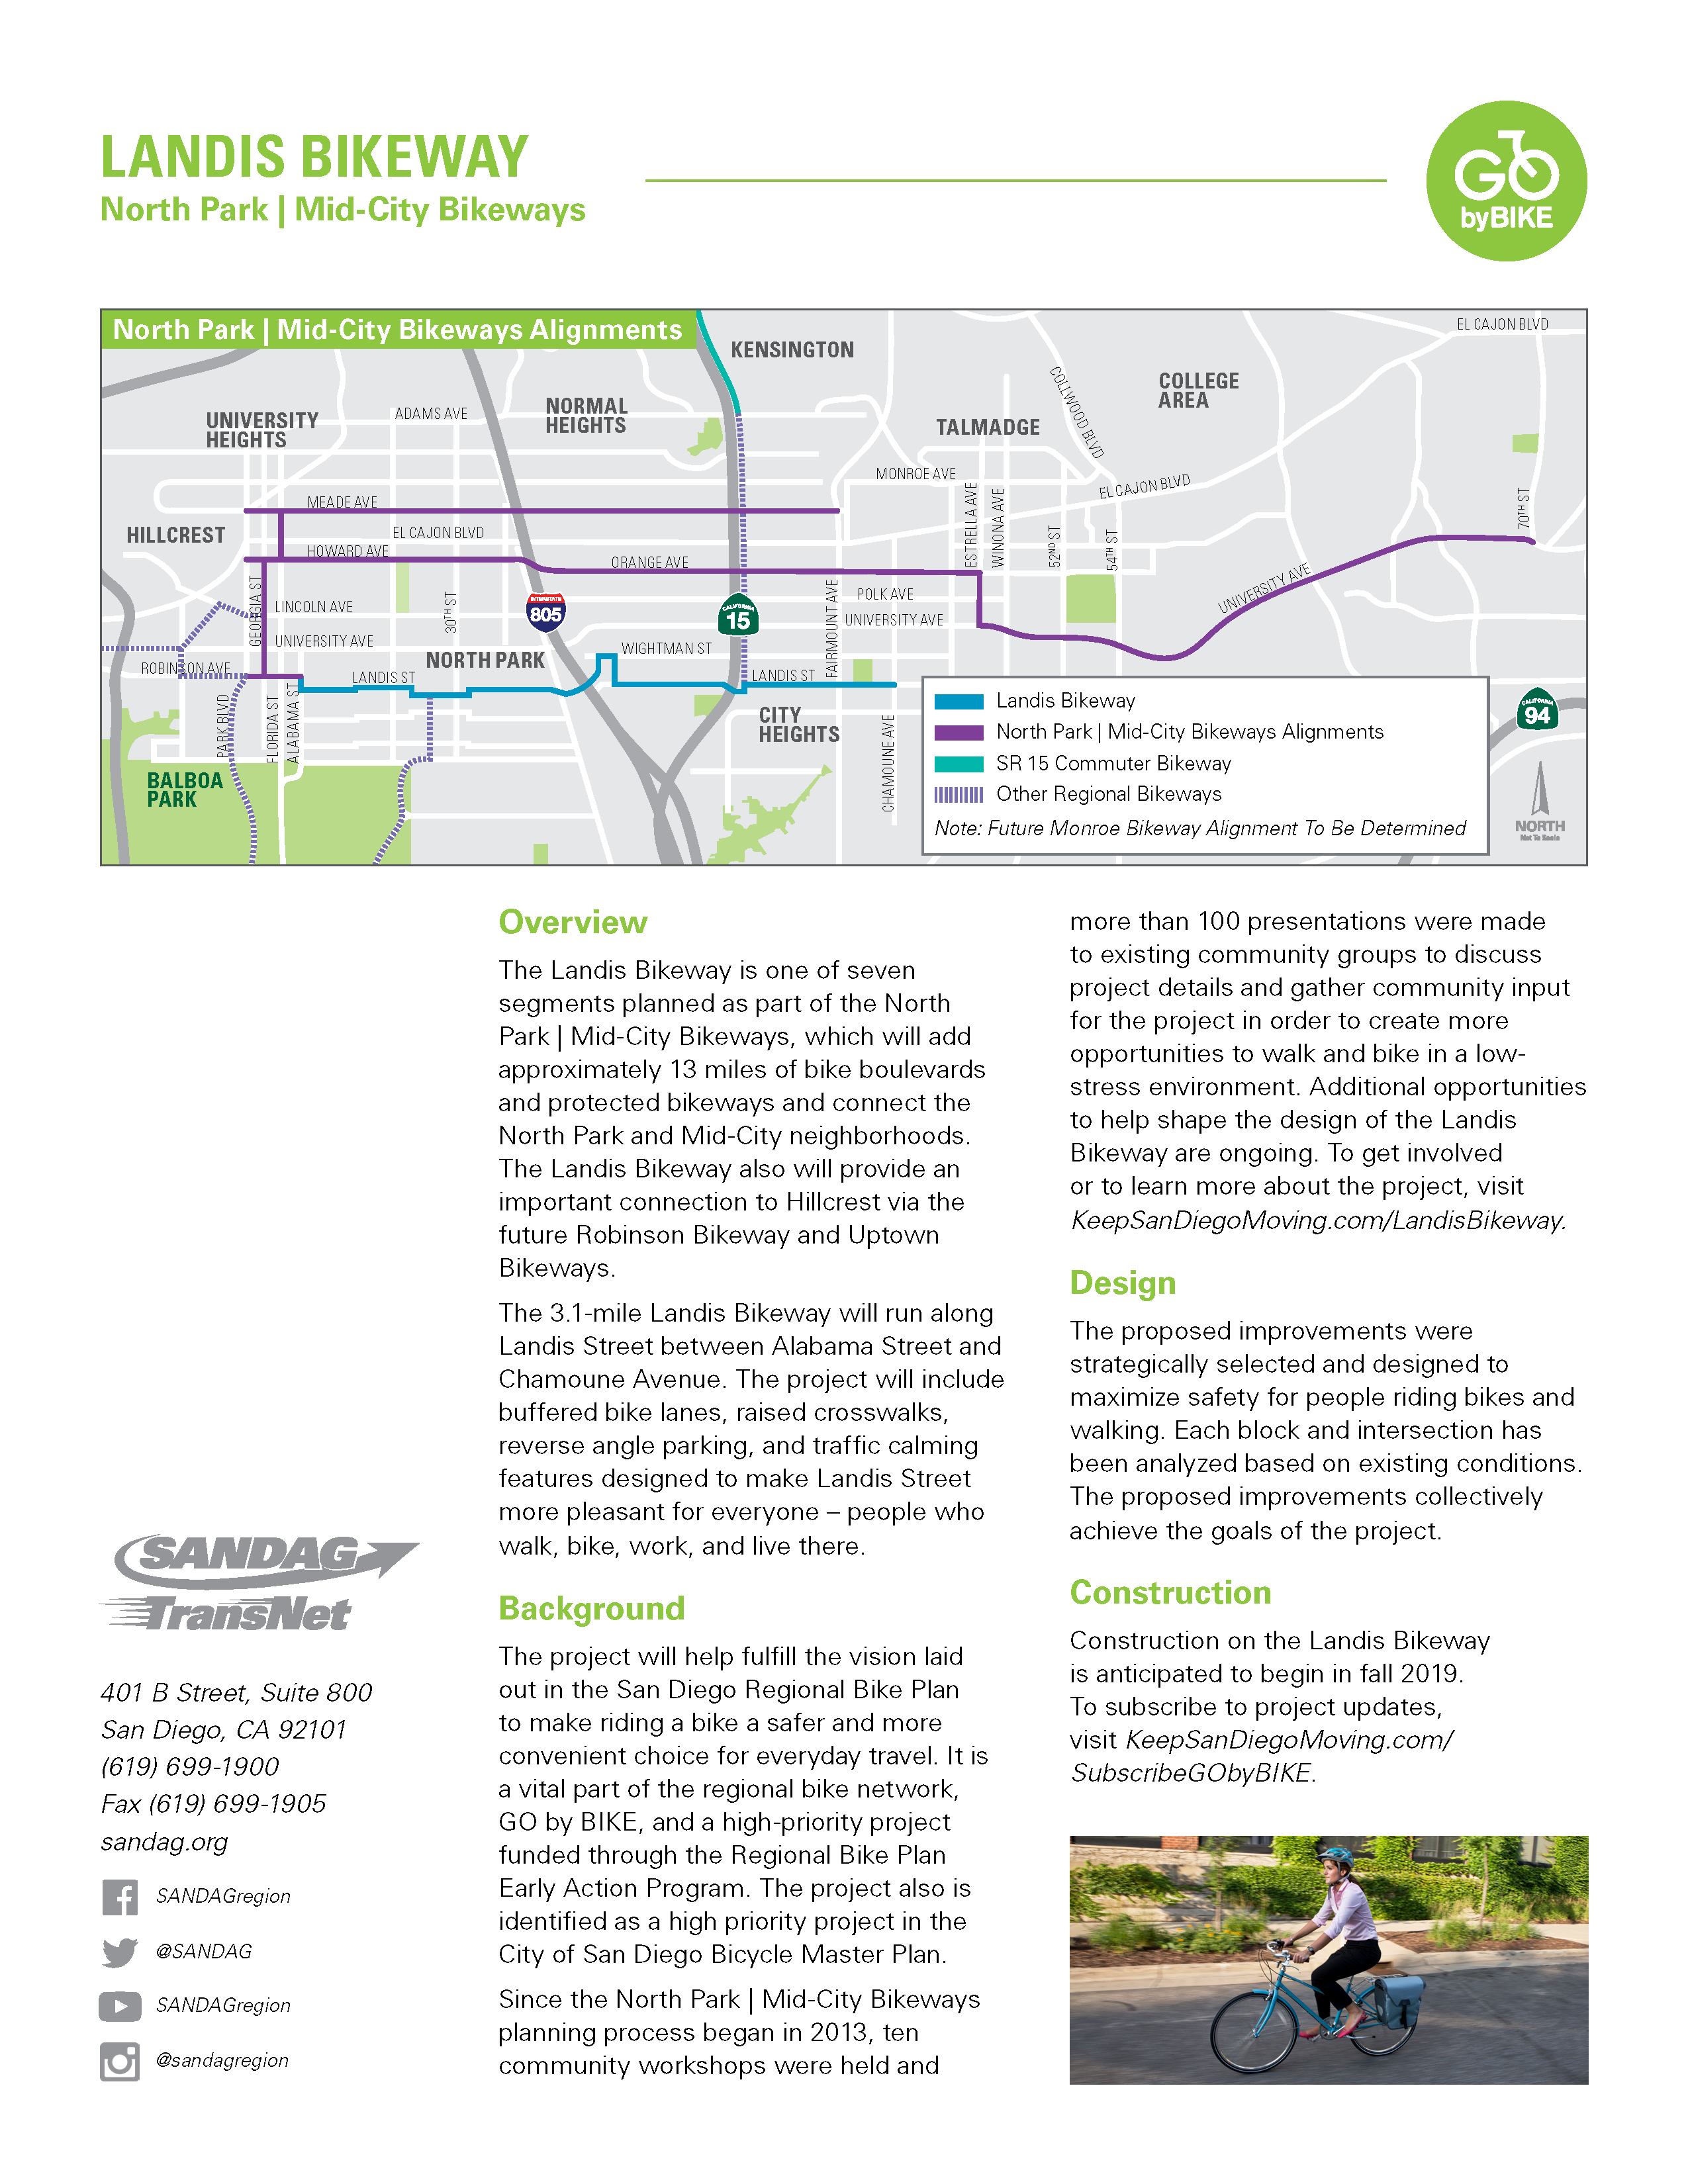 View the Landis Bikeway project fact sheet in English.